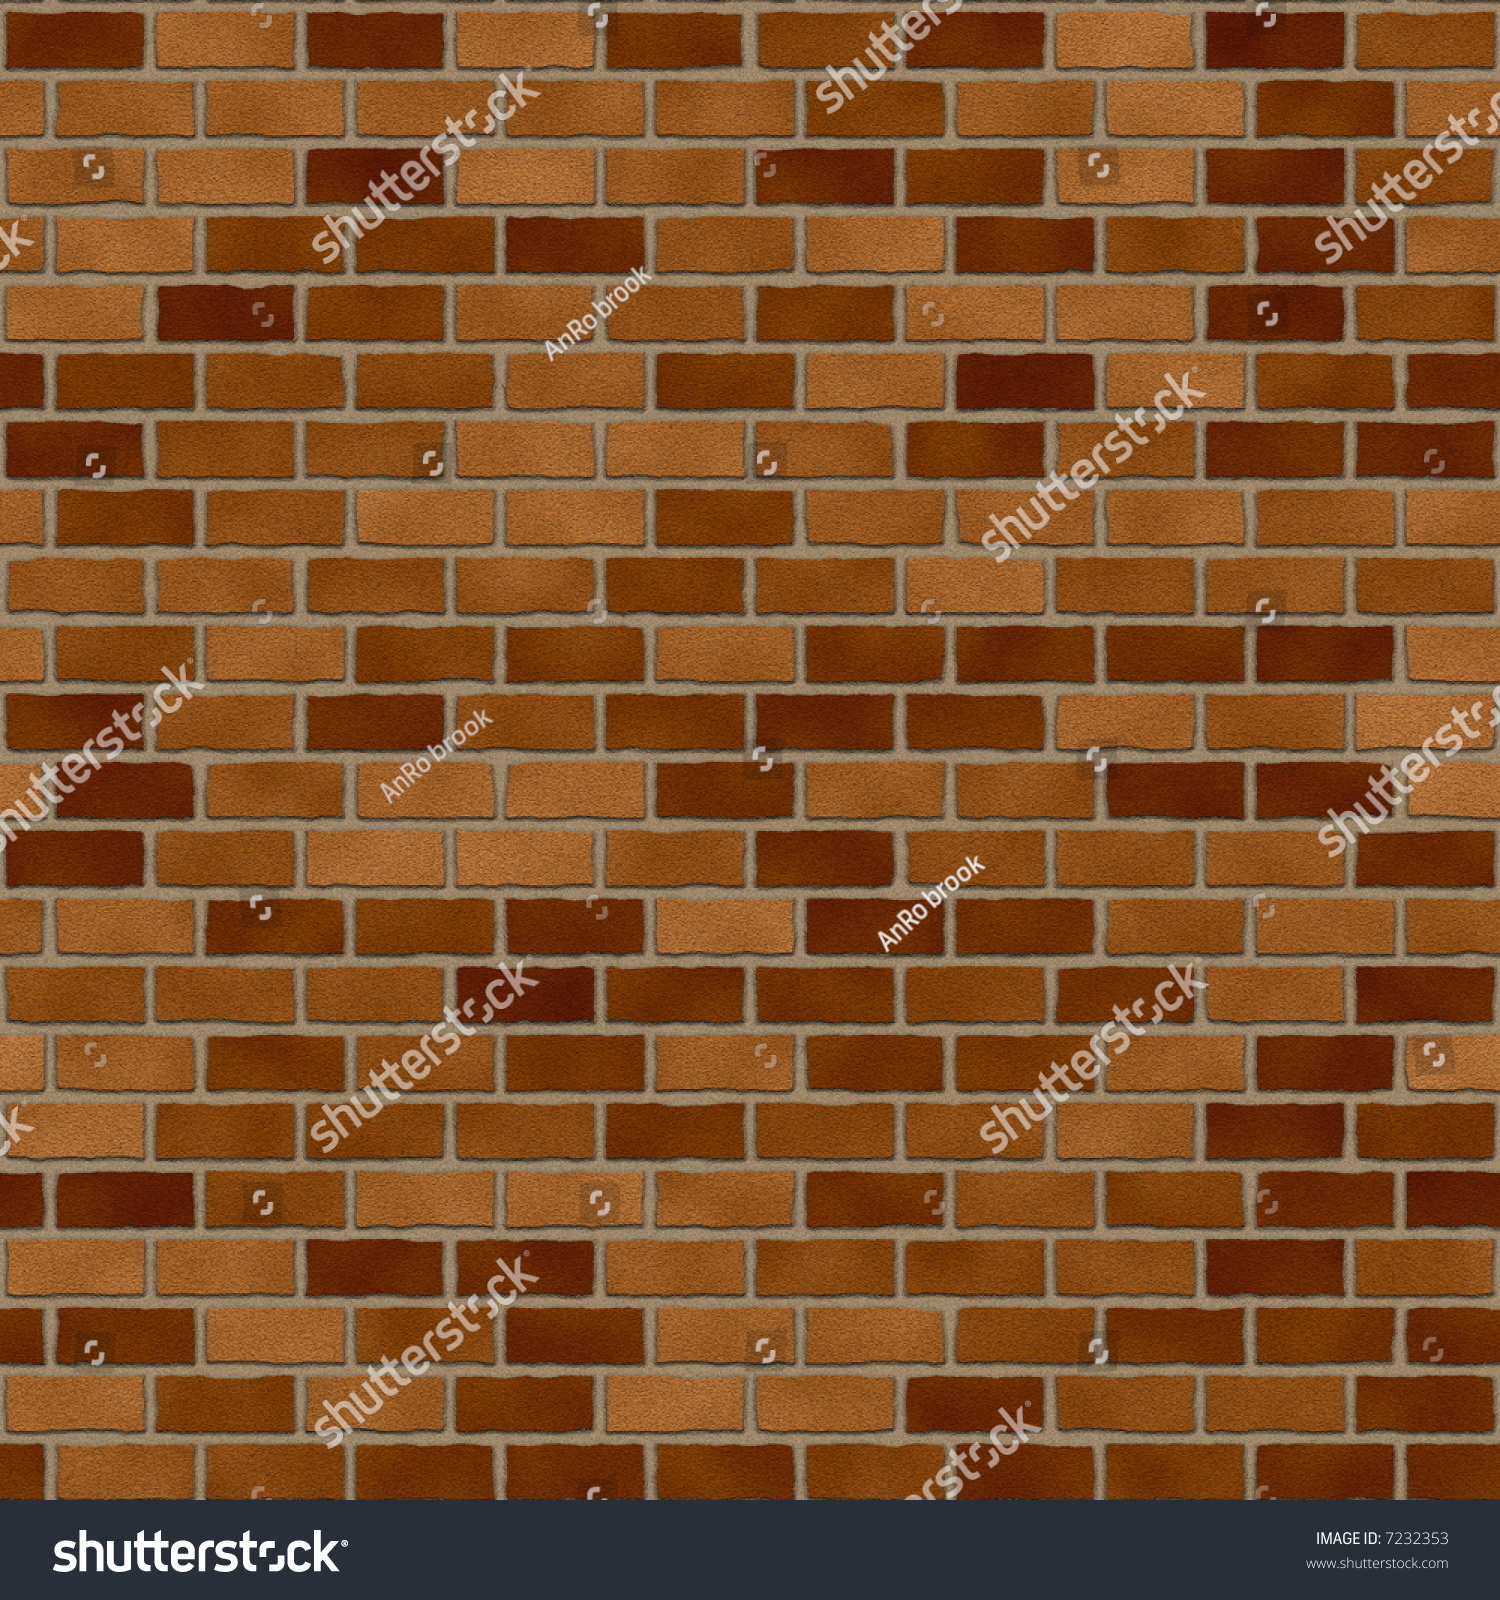 Seamlessly Repeat Pattern Tile, Brickwall Background Stock Photo 